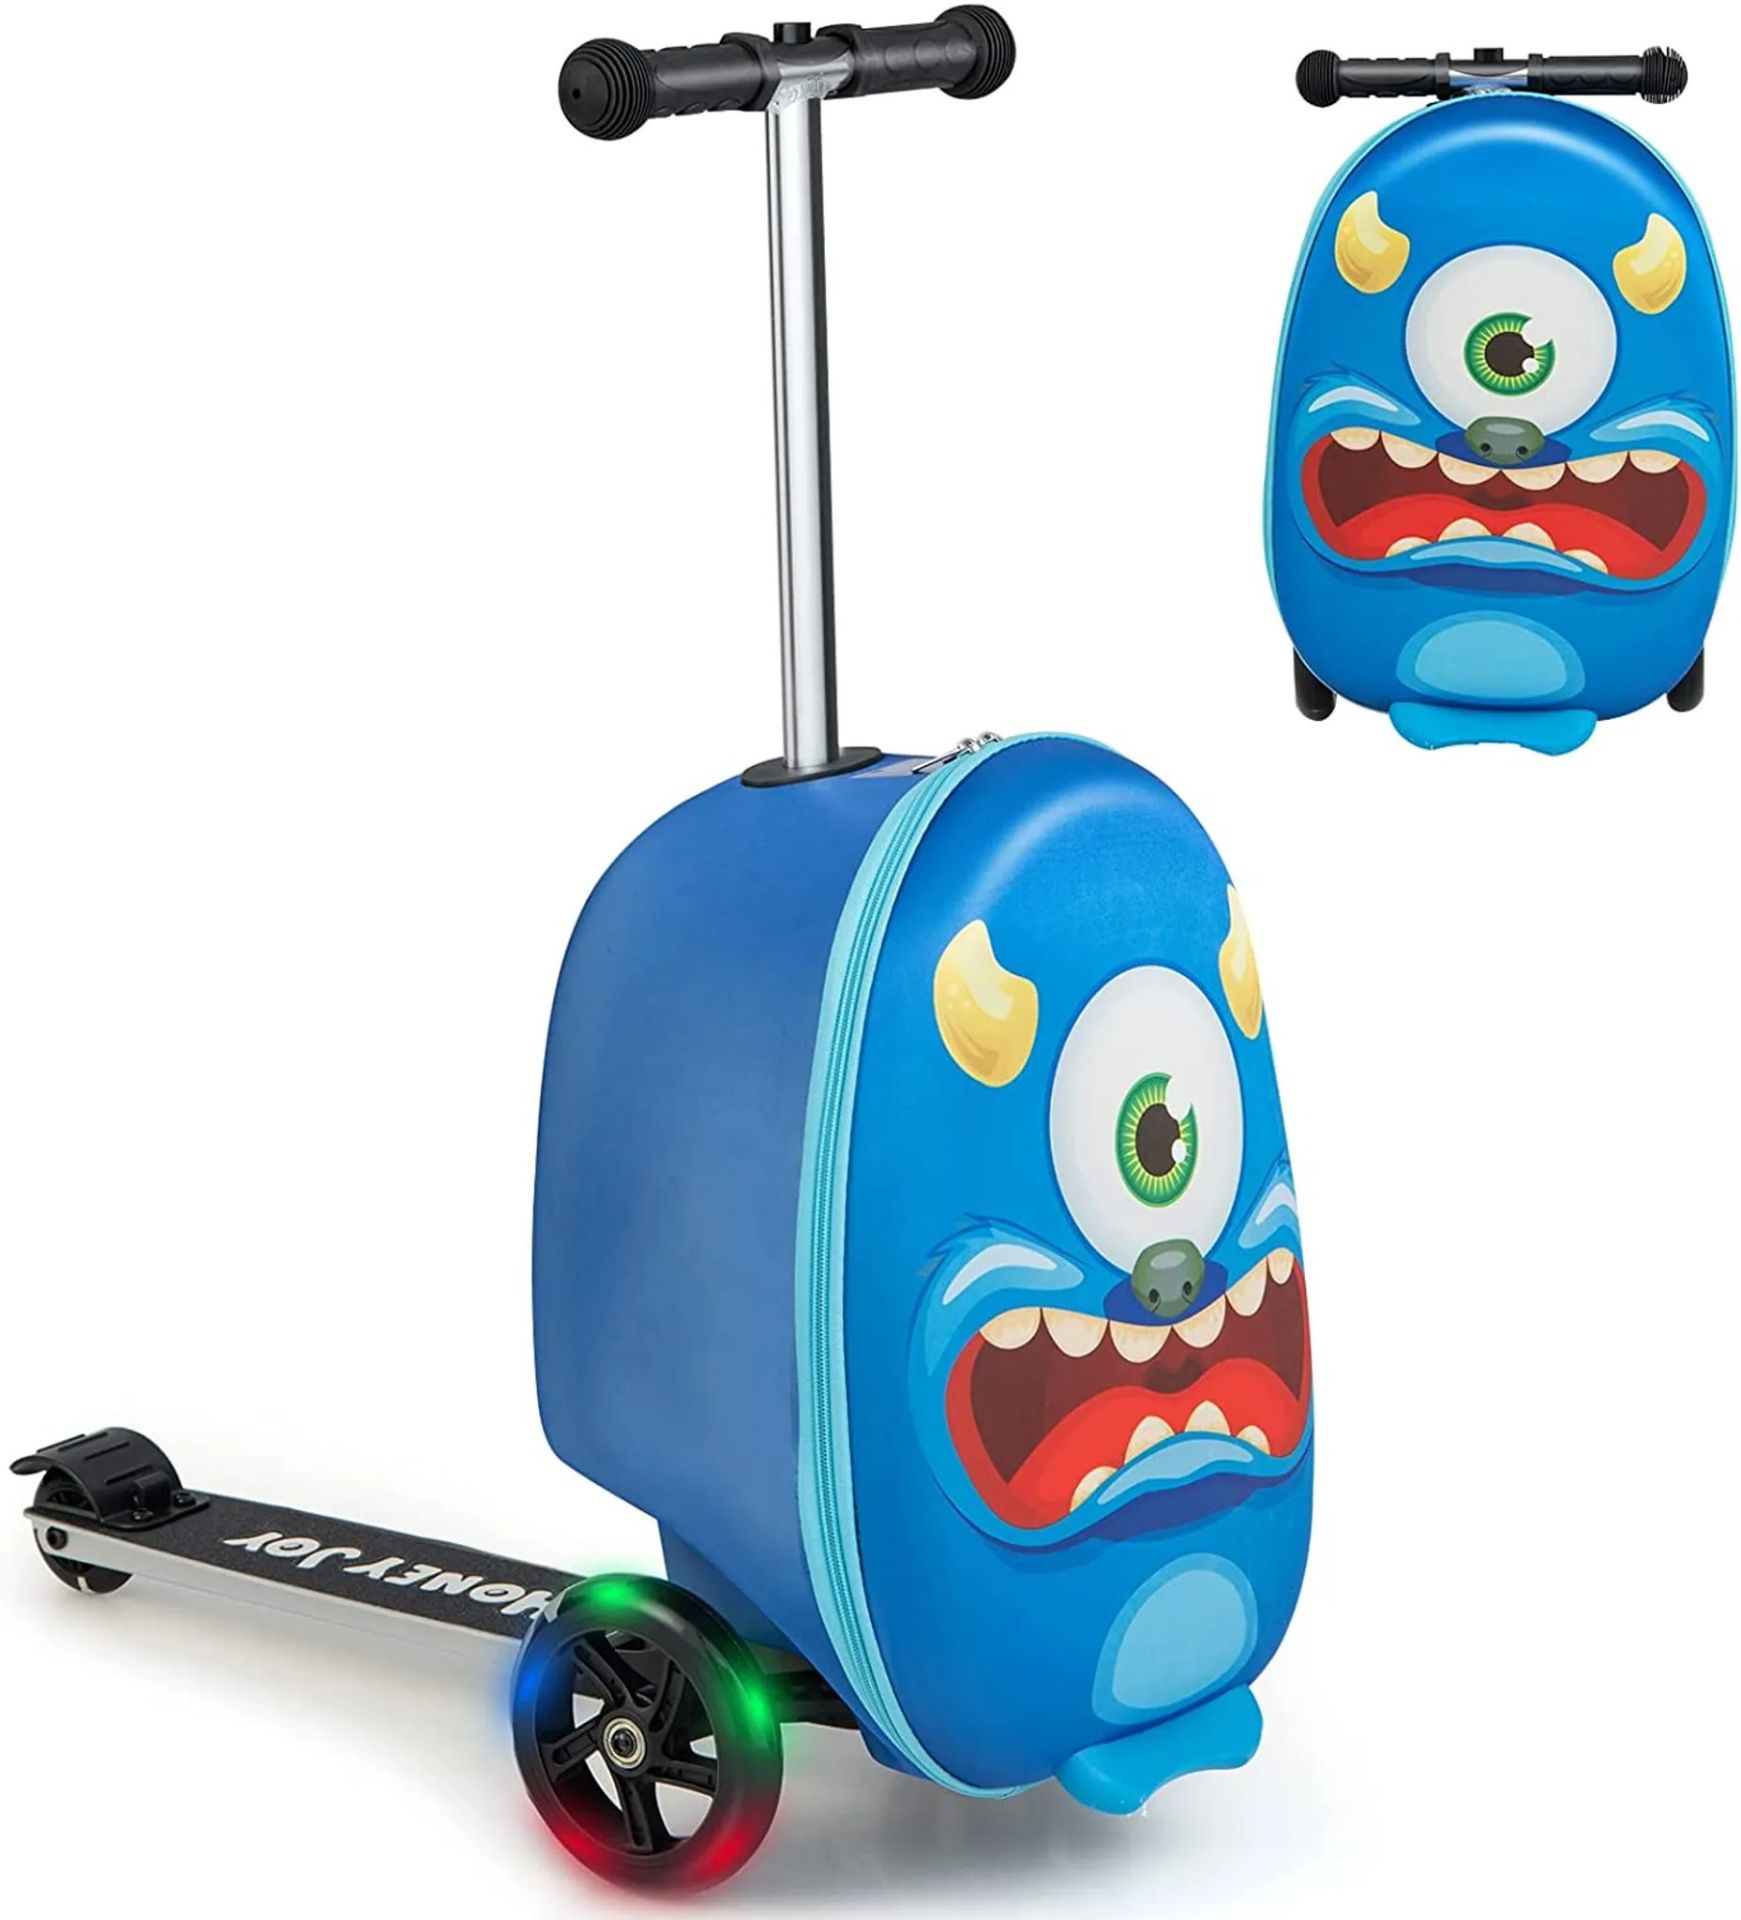 2 in 1 Children's suitcase and scooter - ER24